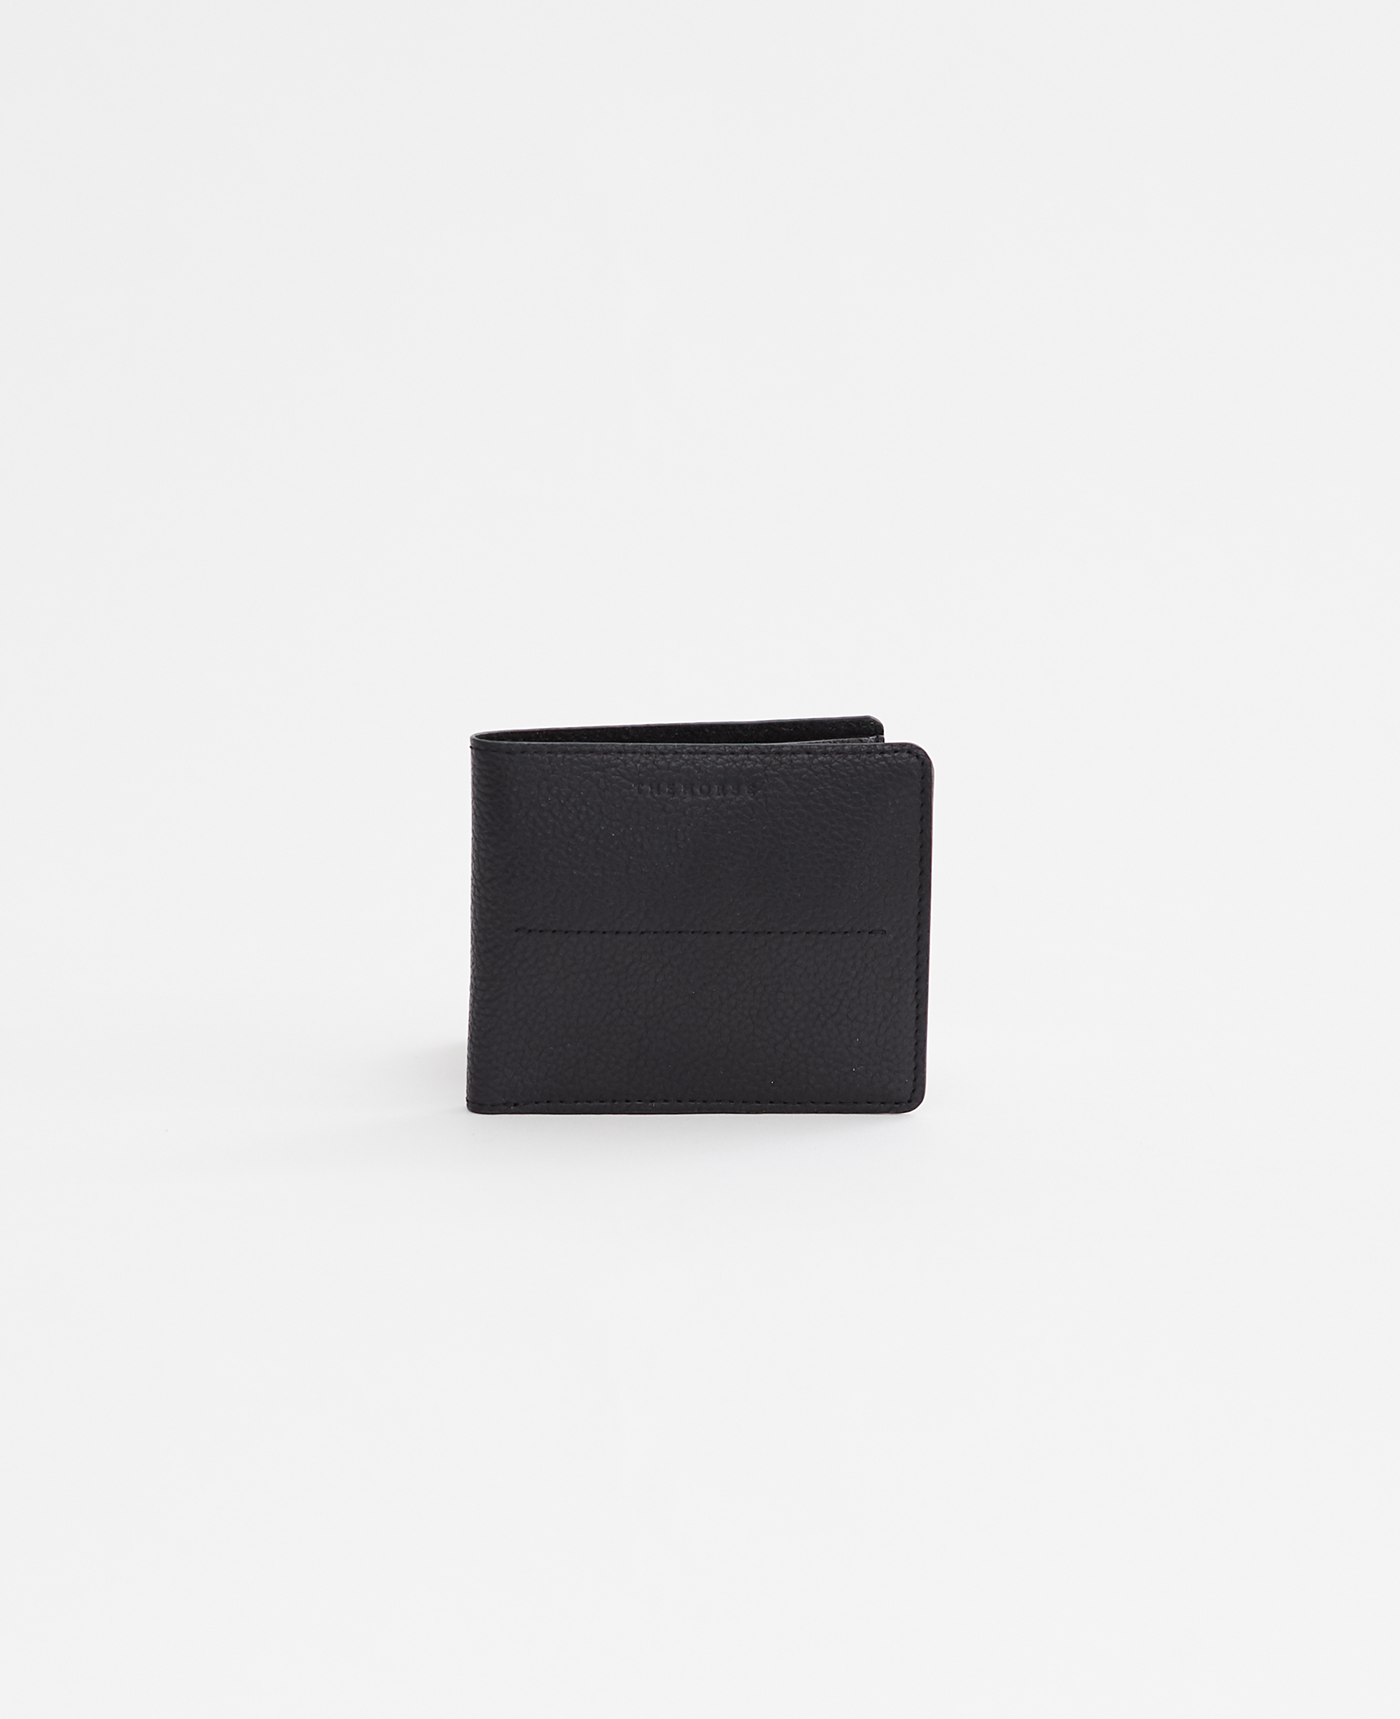 Barney Bi-fold Leather Wallet With Coin Pocket in Black by The Horse